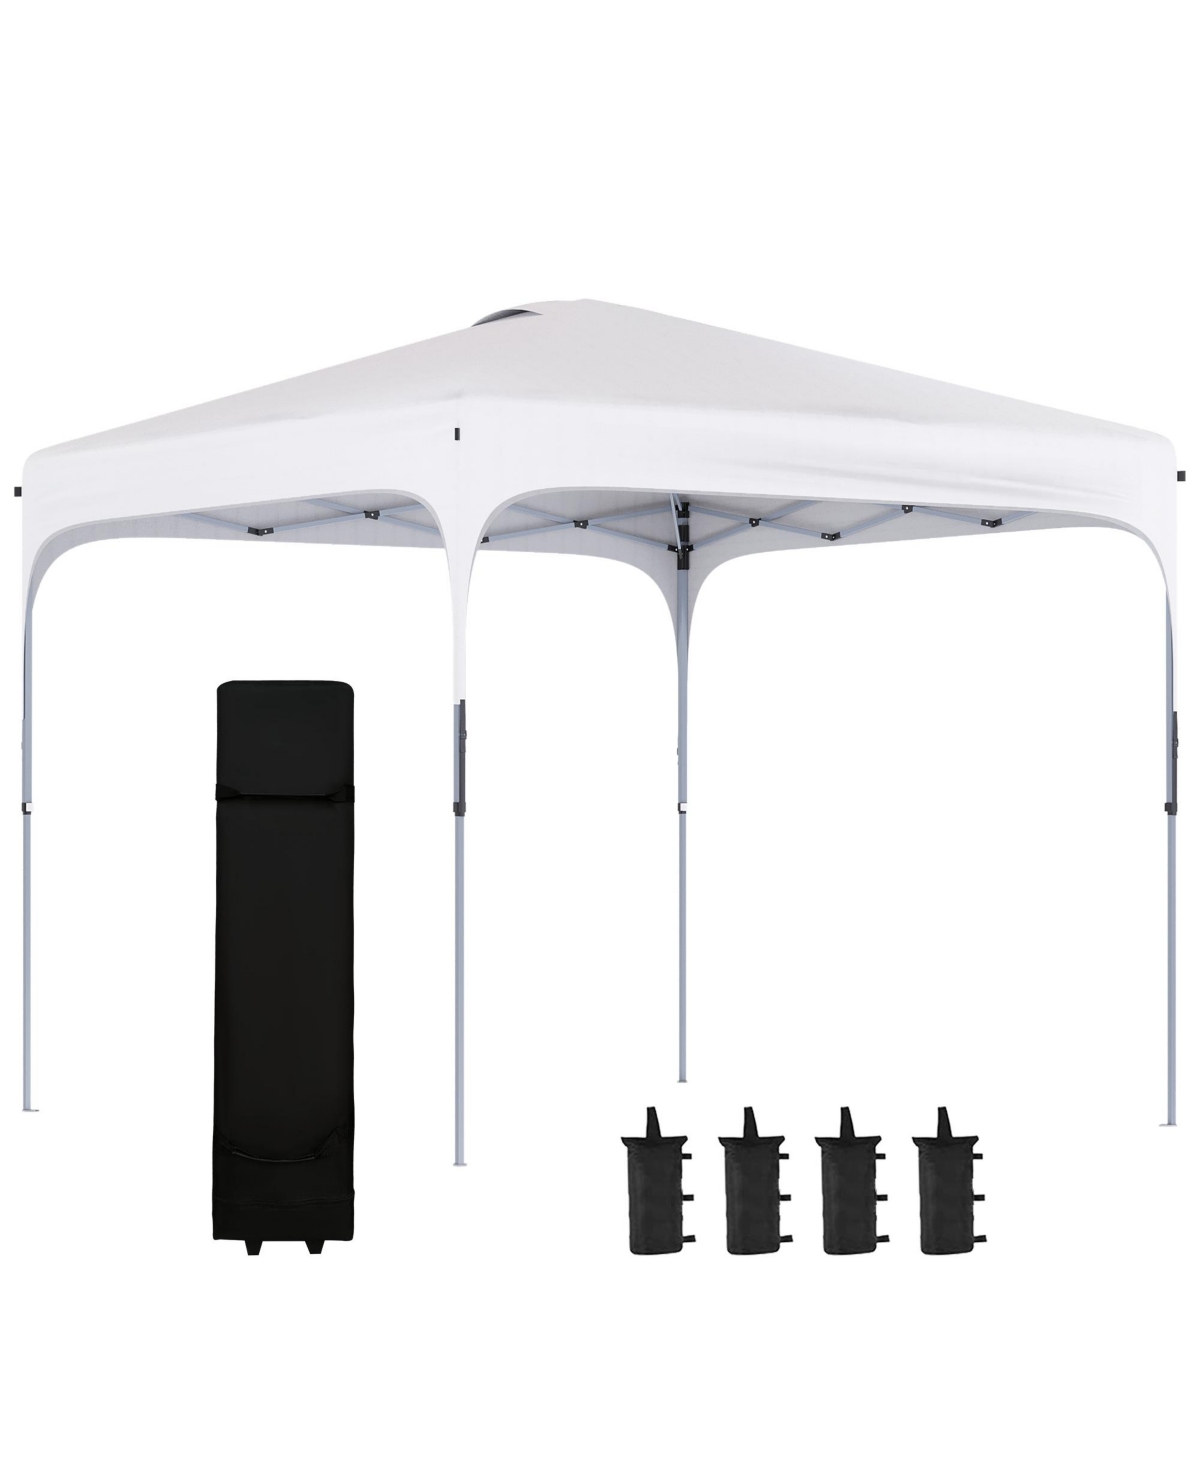 8' x 8' Pop Up Canopy with Adjustable Height, Foldable Gazebo Tent with Carry Bag with Wheels and 4 Leg Weight Bags for Outdoor Garden Patio